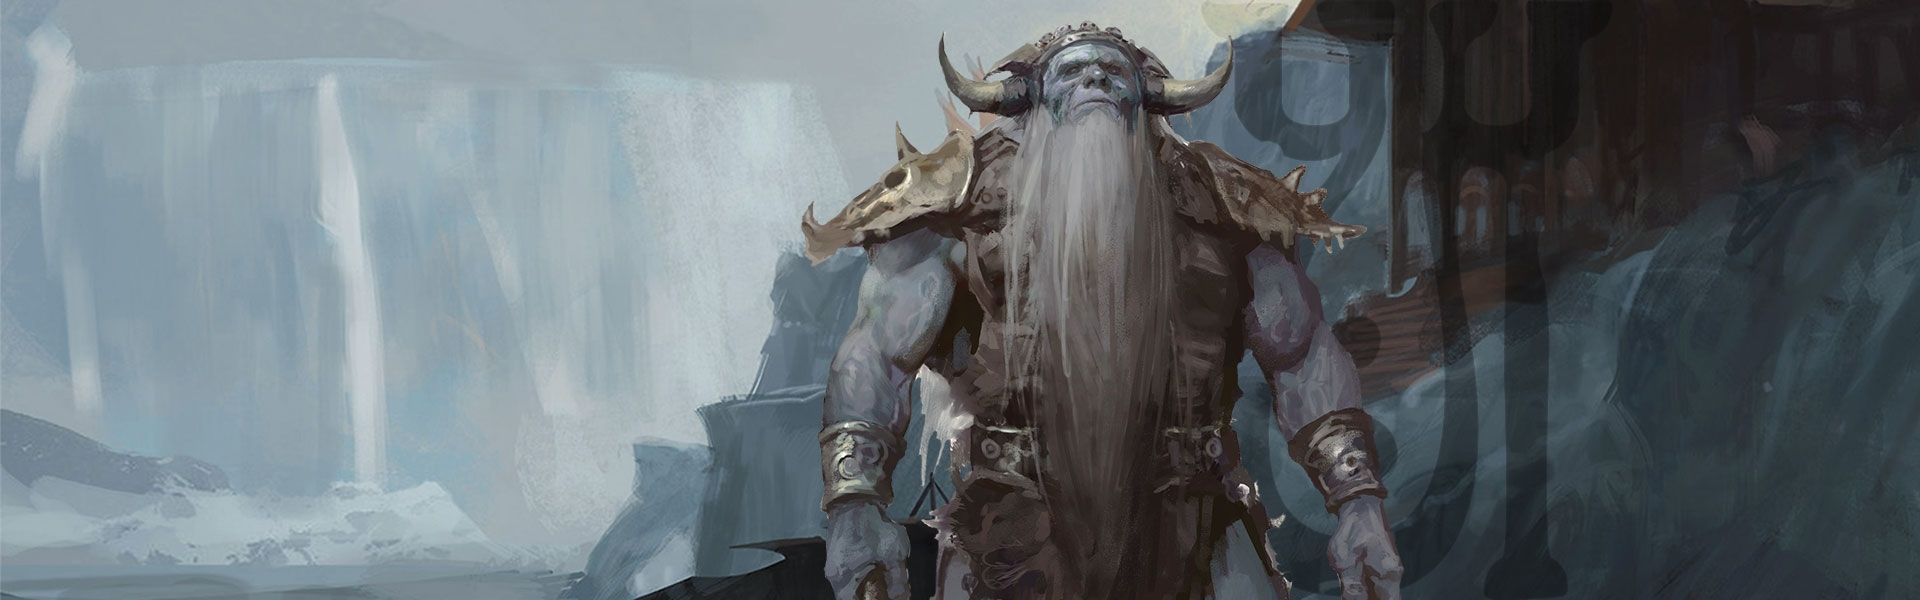 Monsters - Frost Giants. Dungeons & Dragons